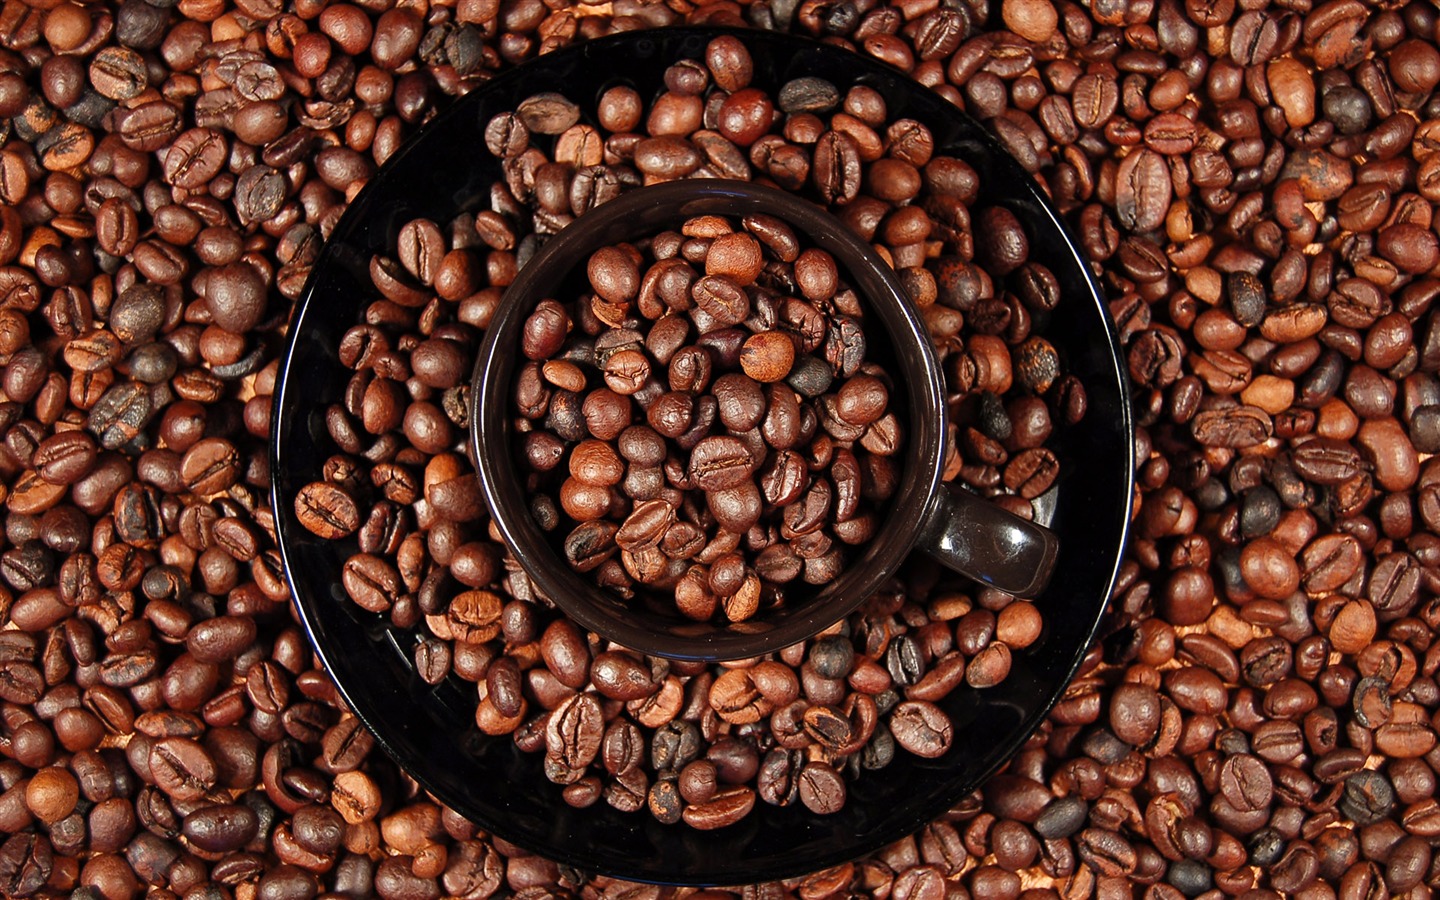 Coffee feature wallpaper (7) #15 - 1440x900